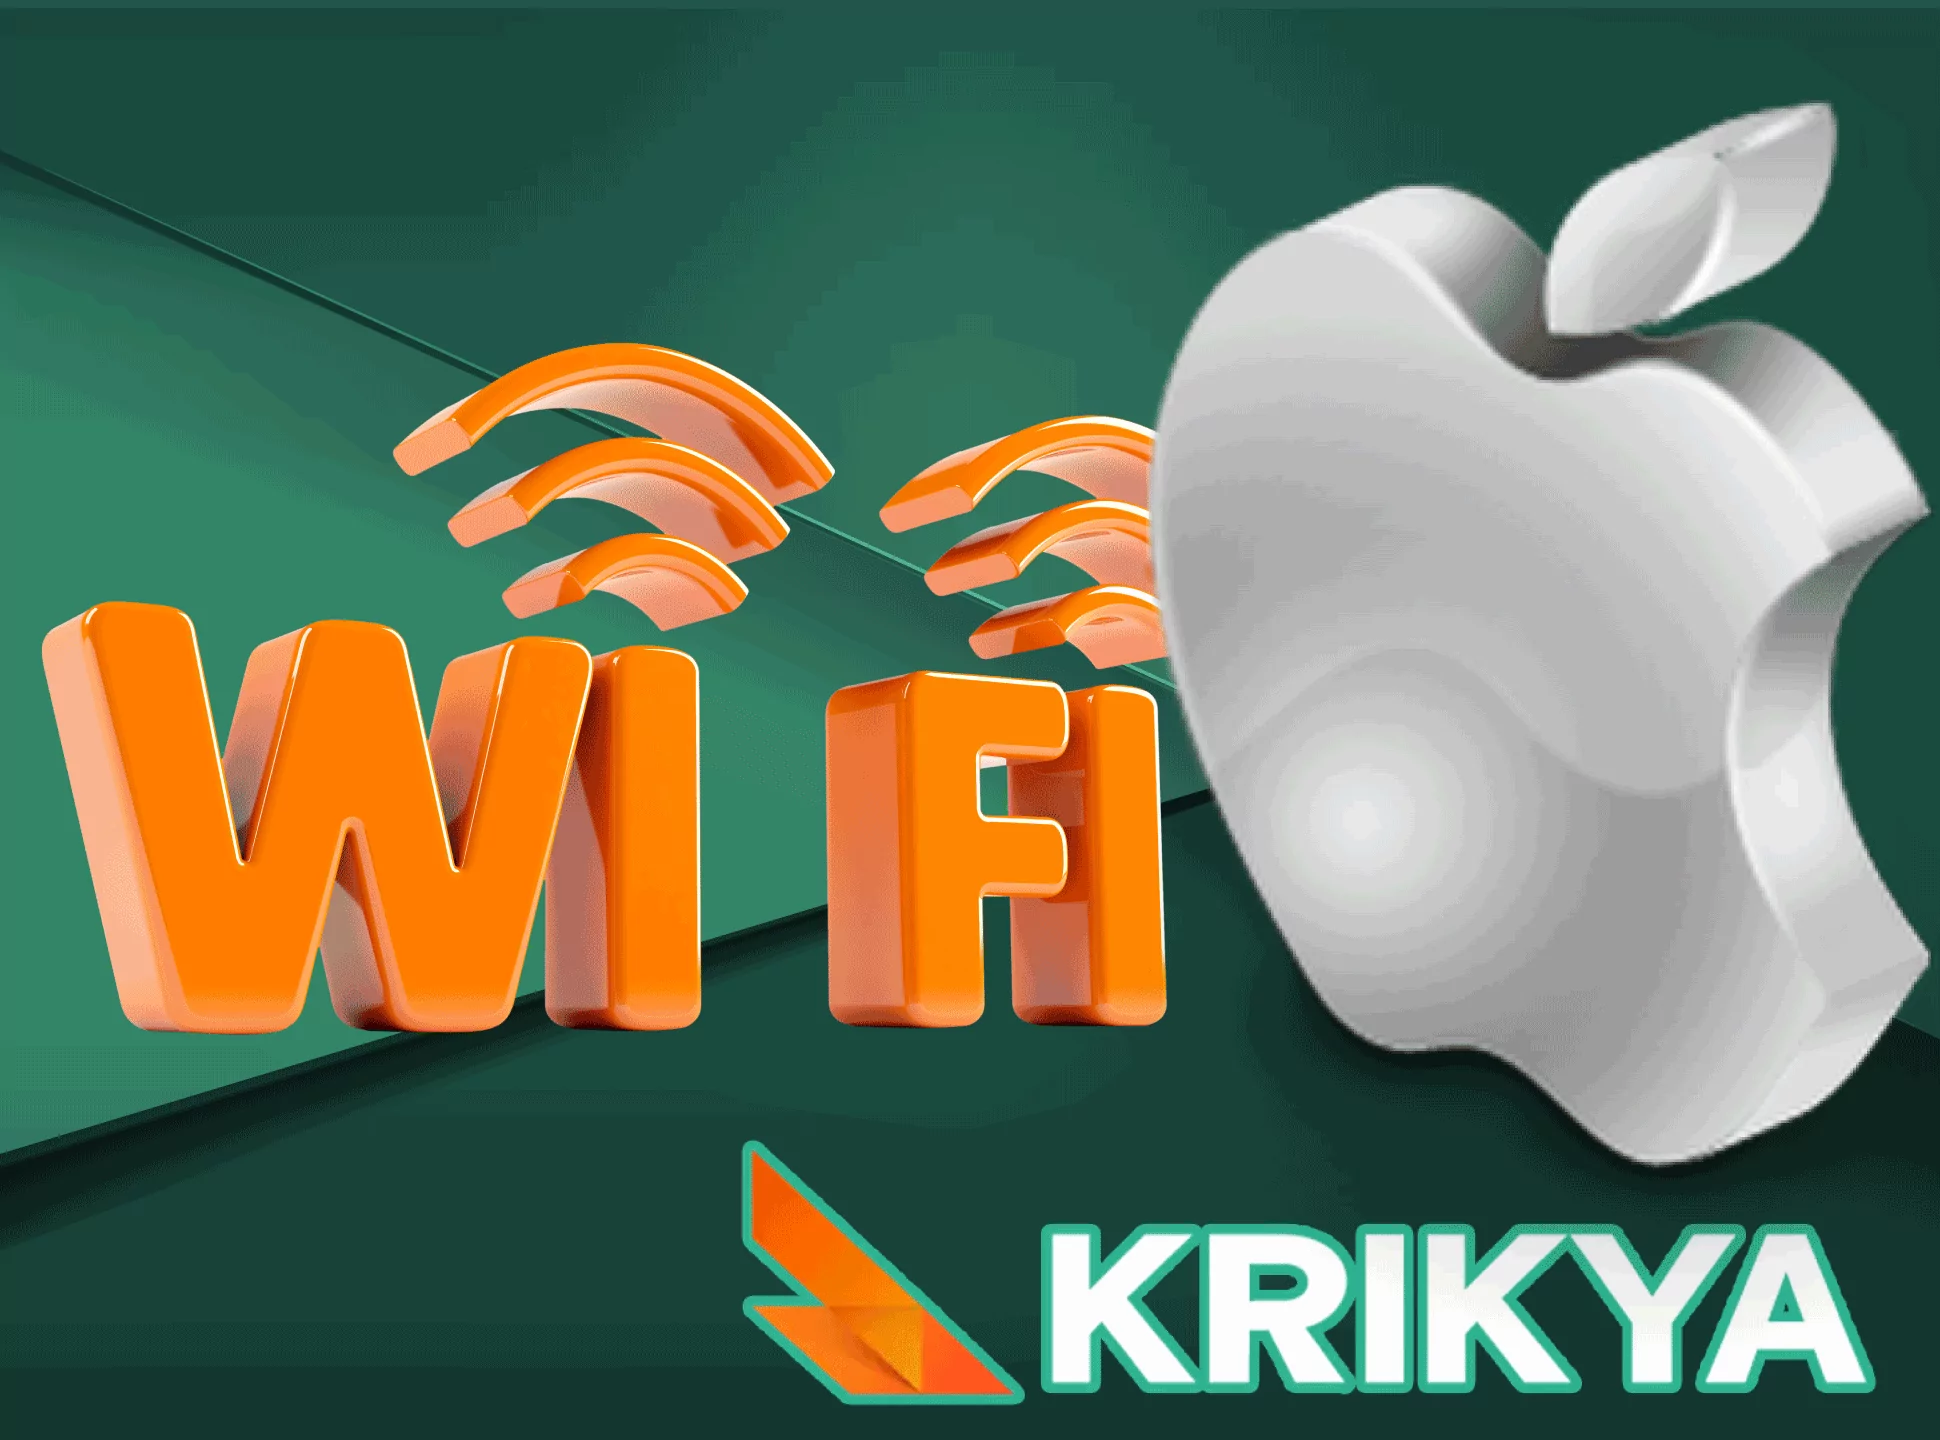 Connect to the strong WiFi and go to the Krikya website via your iOS device.